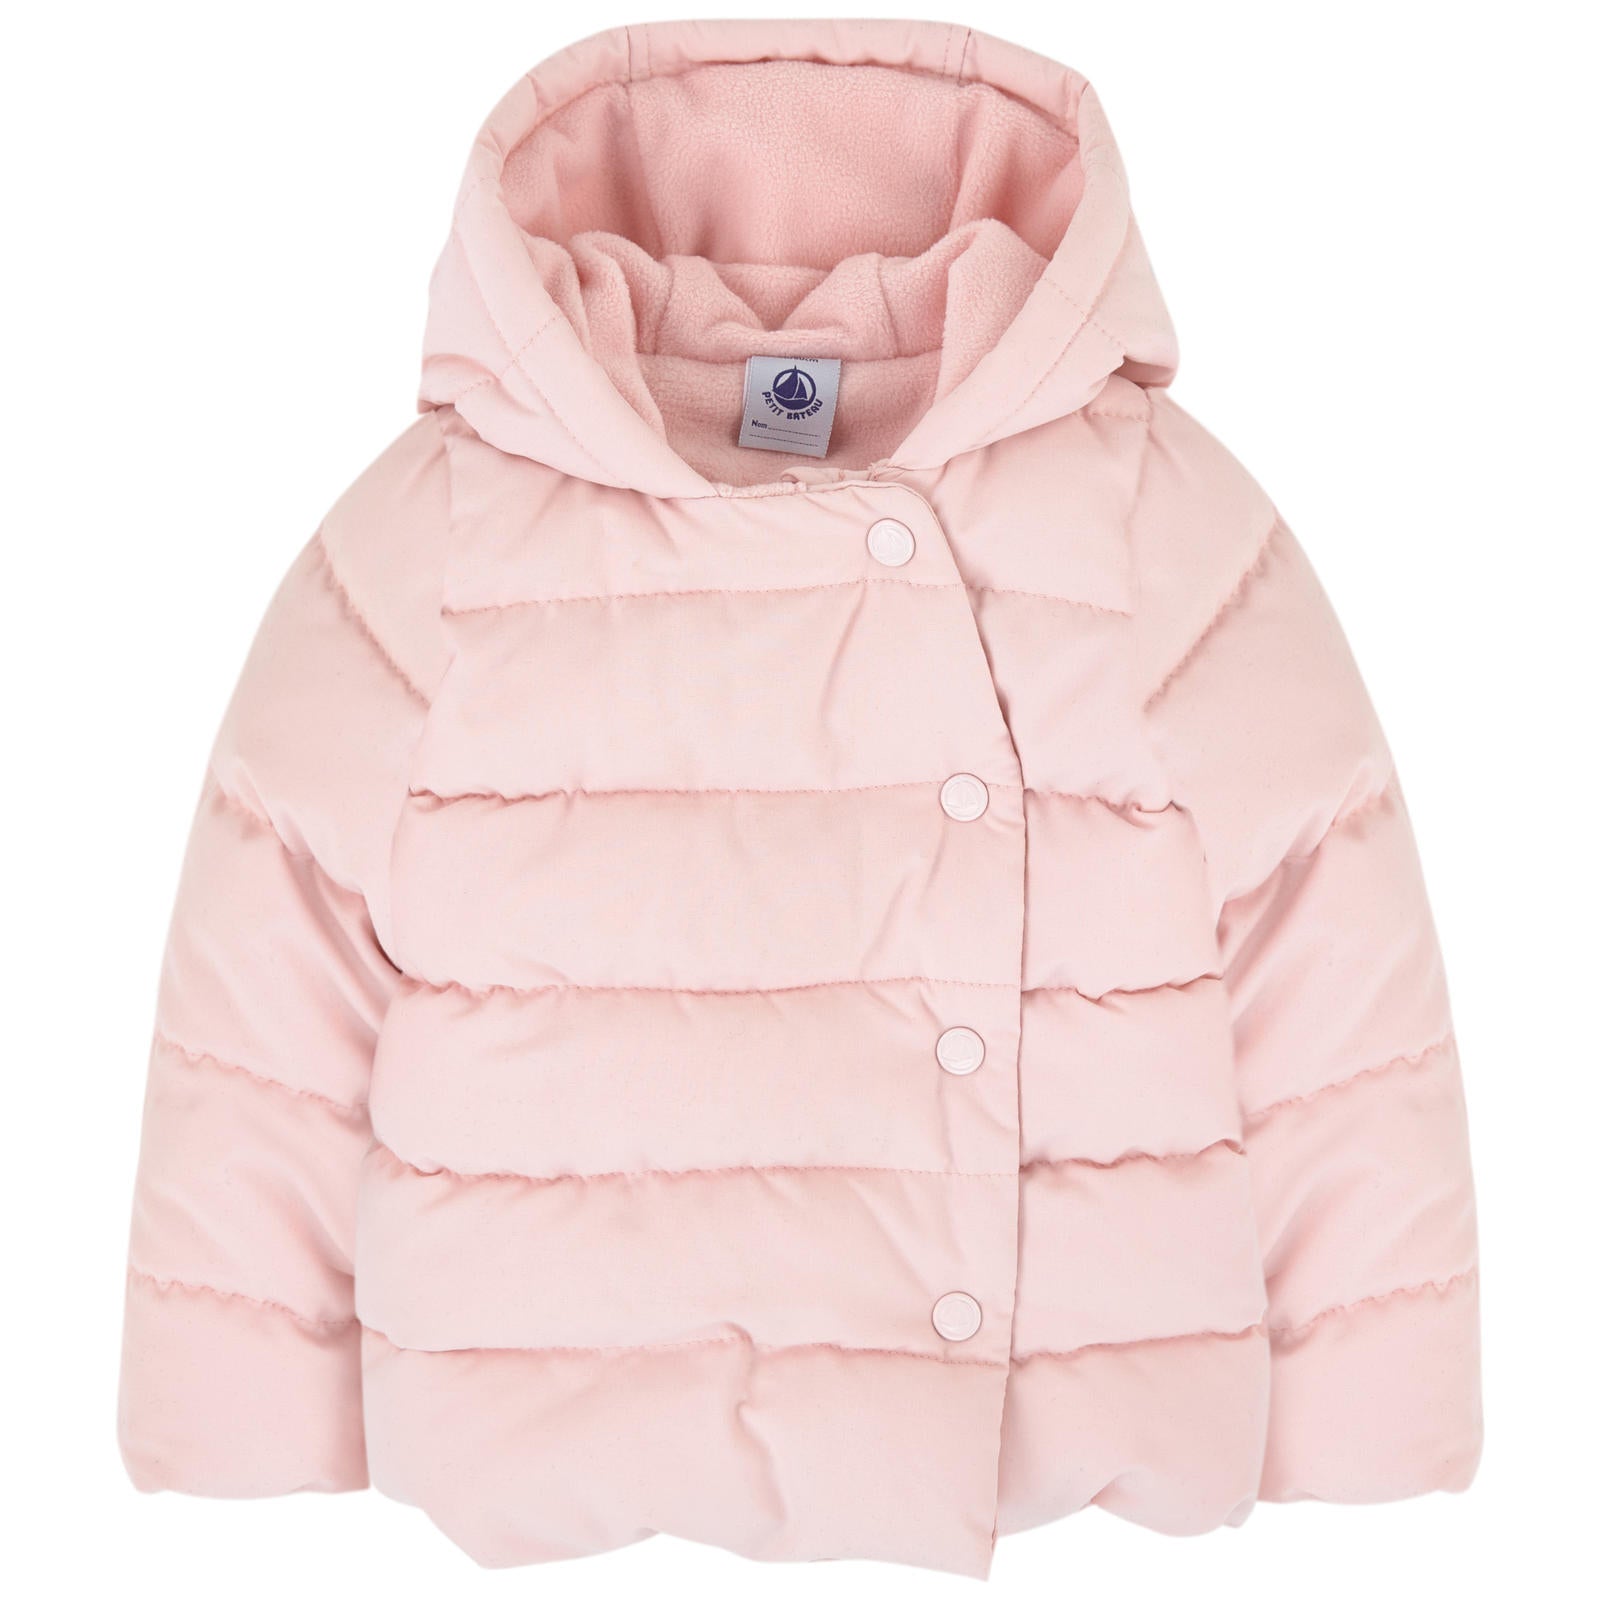 Kids Outerwear, It is Time to Bundle Up